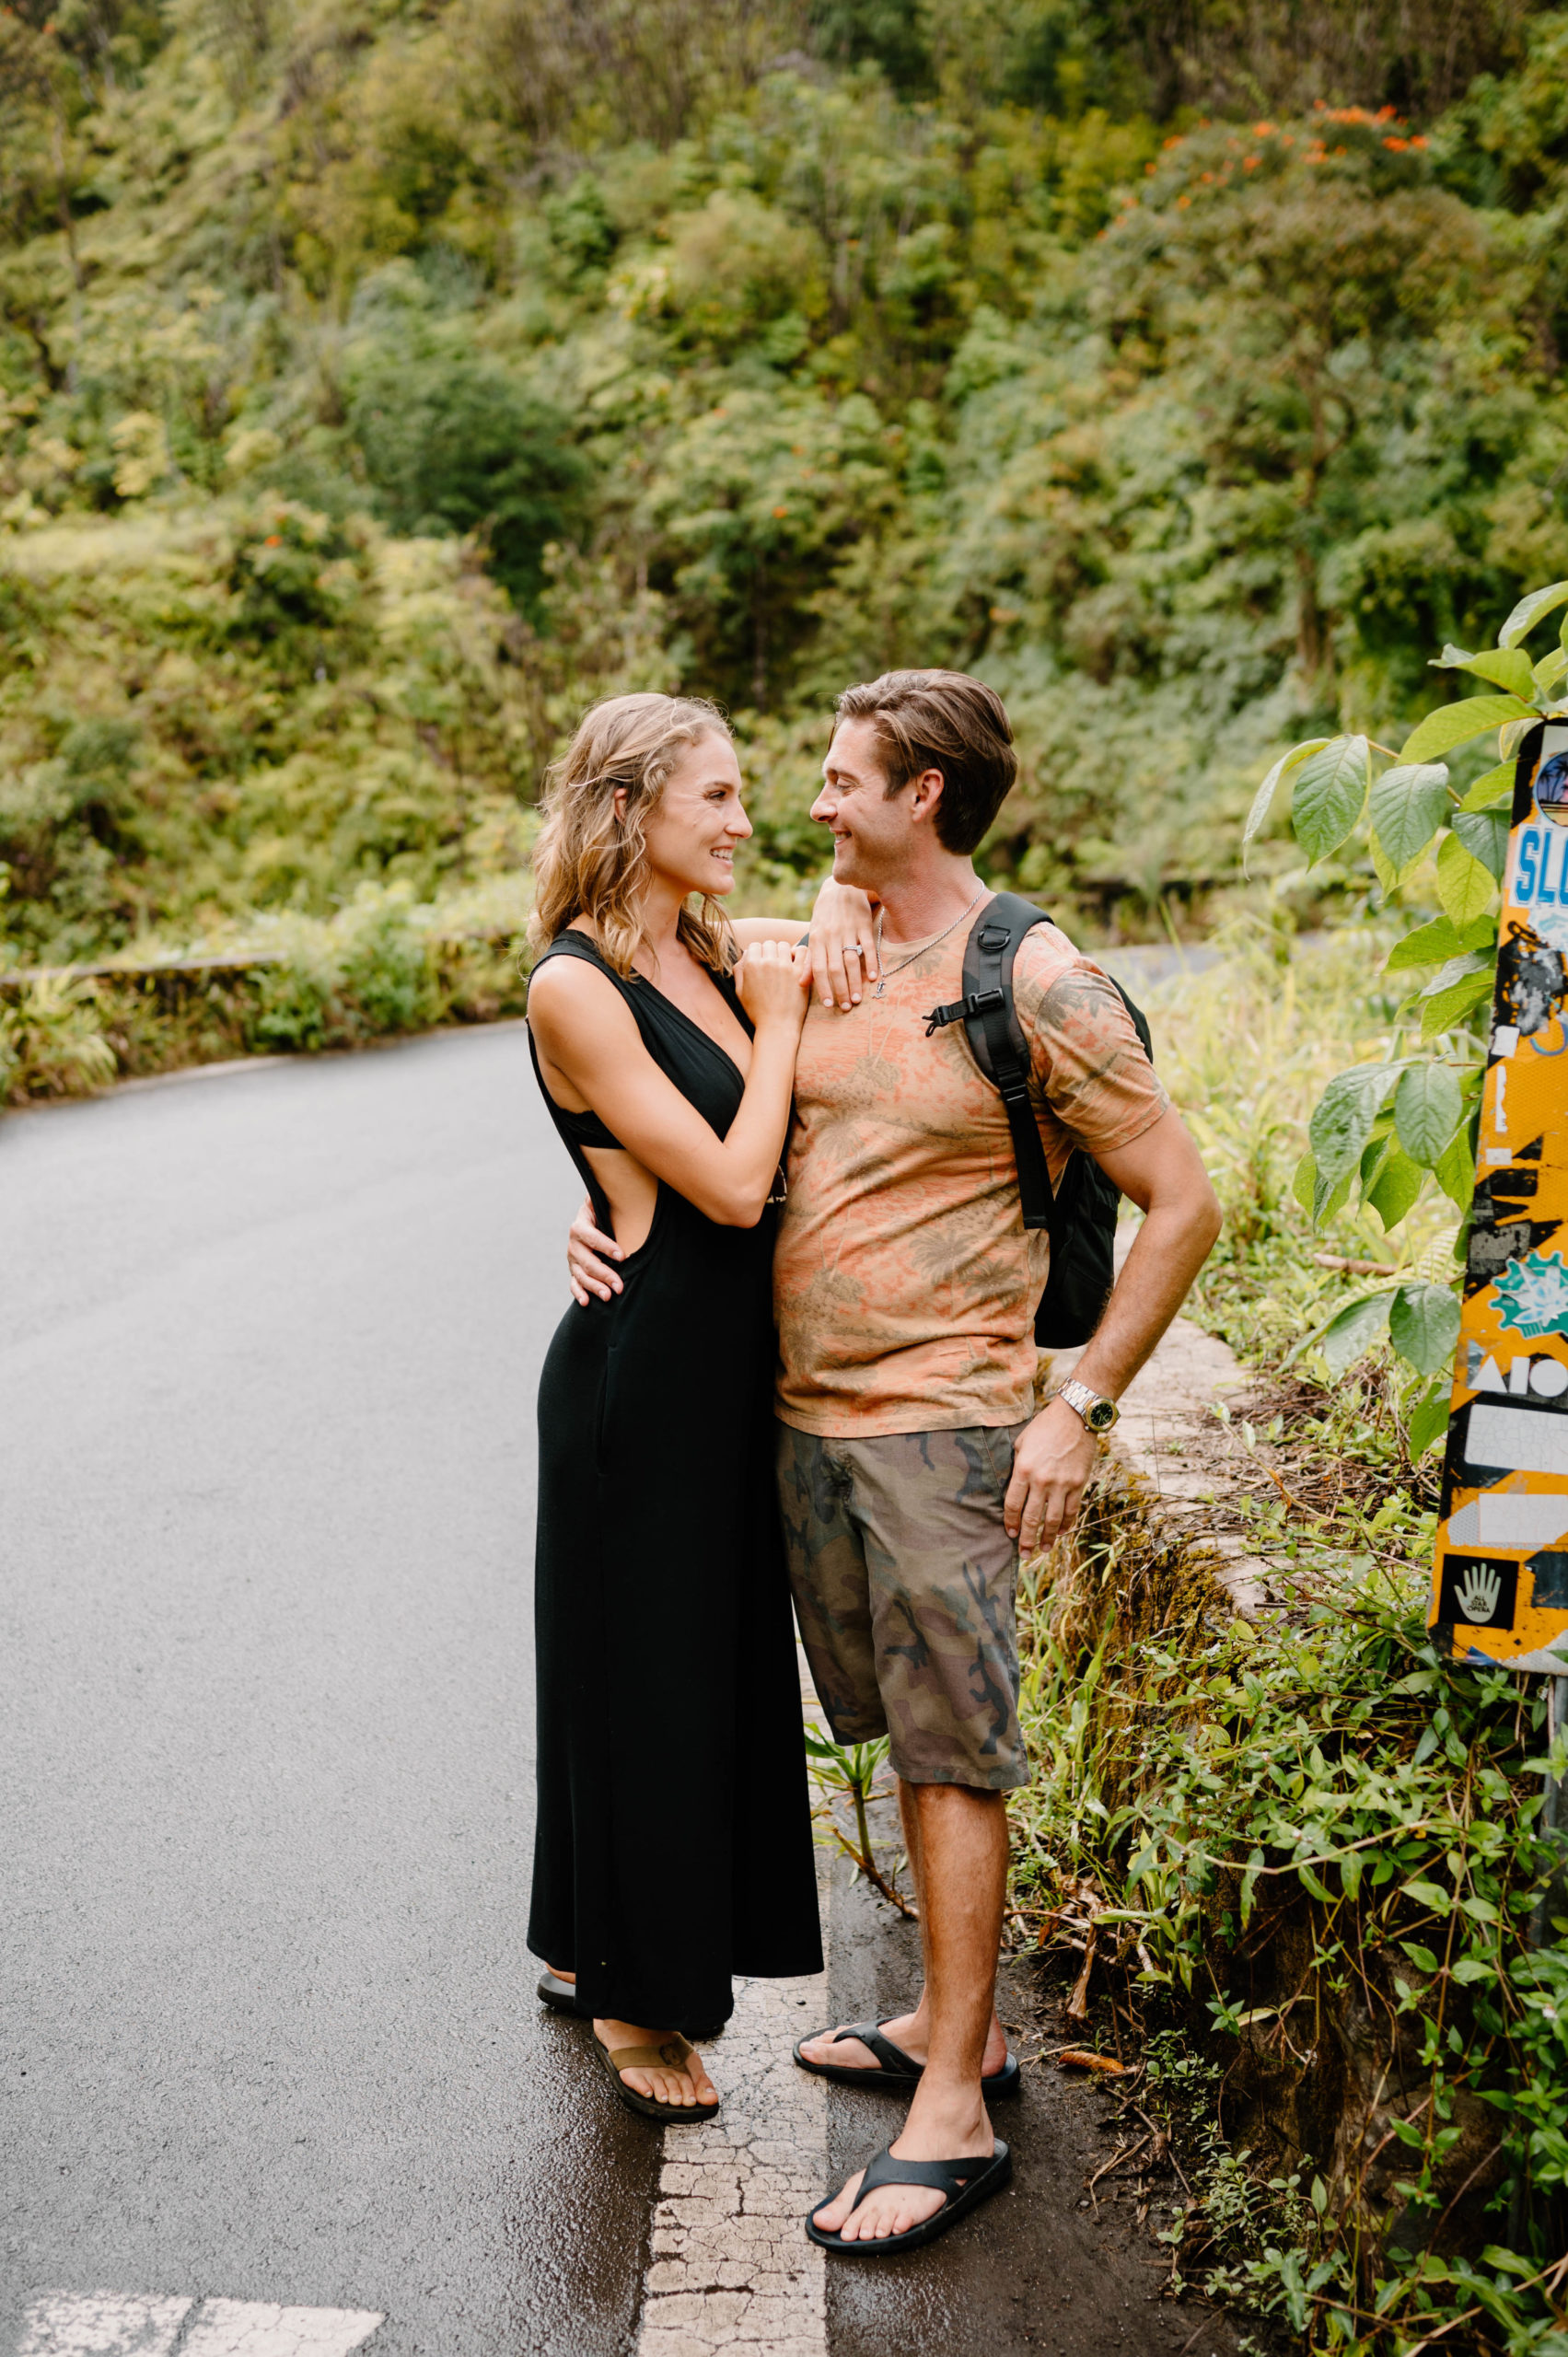 During your Maui Elopement, explore the many waterfalls the island has to offer! 